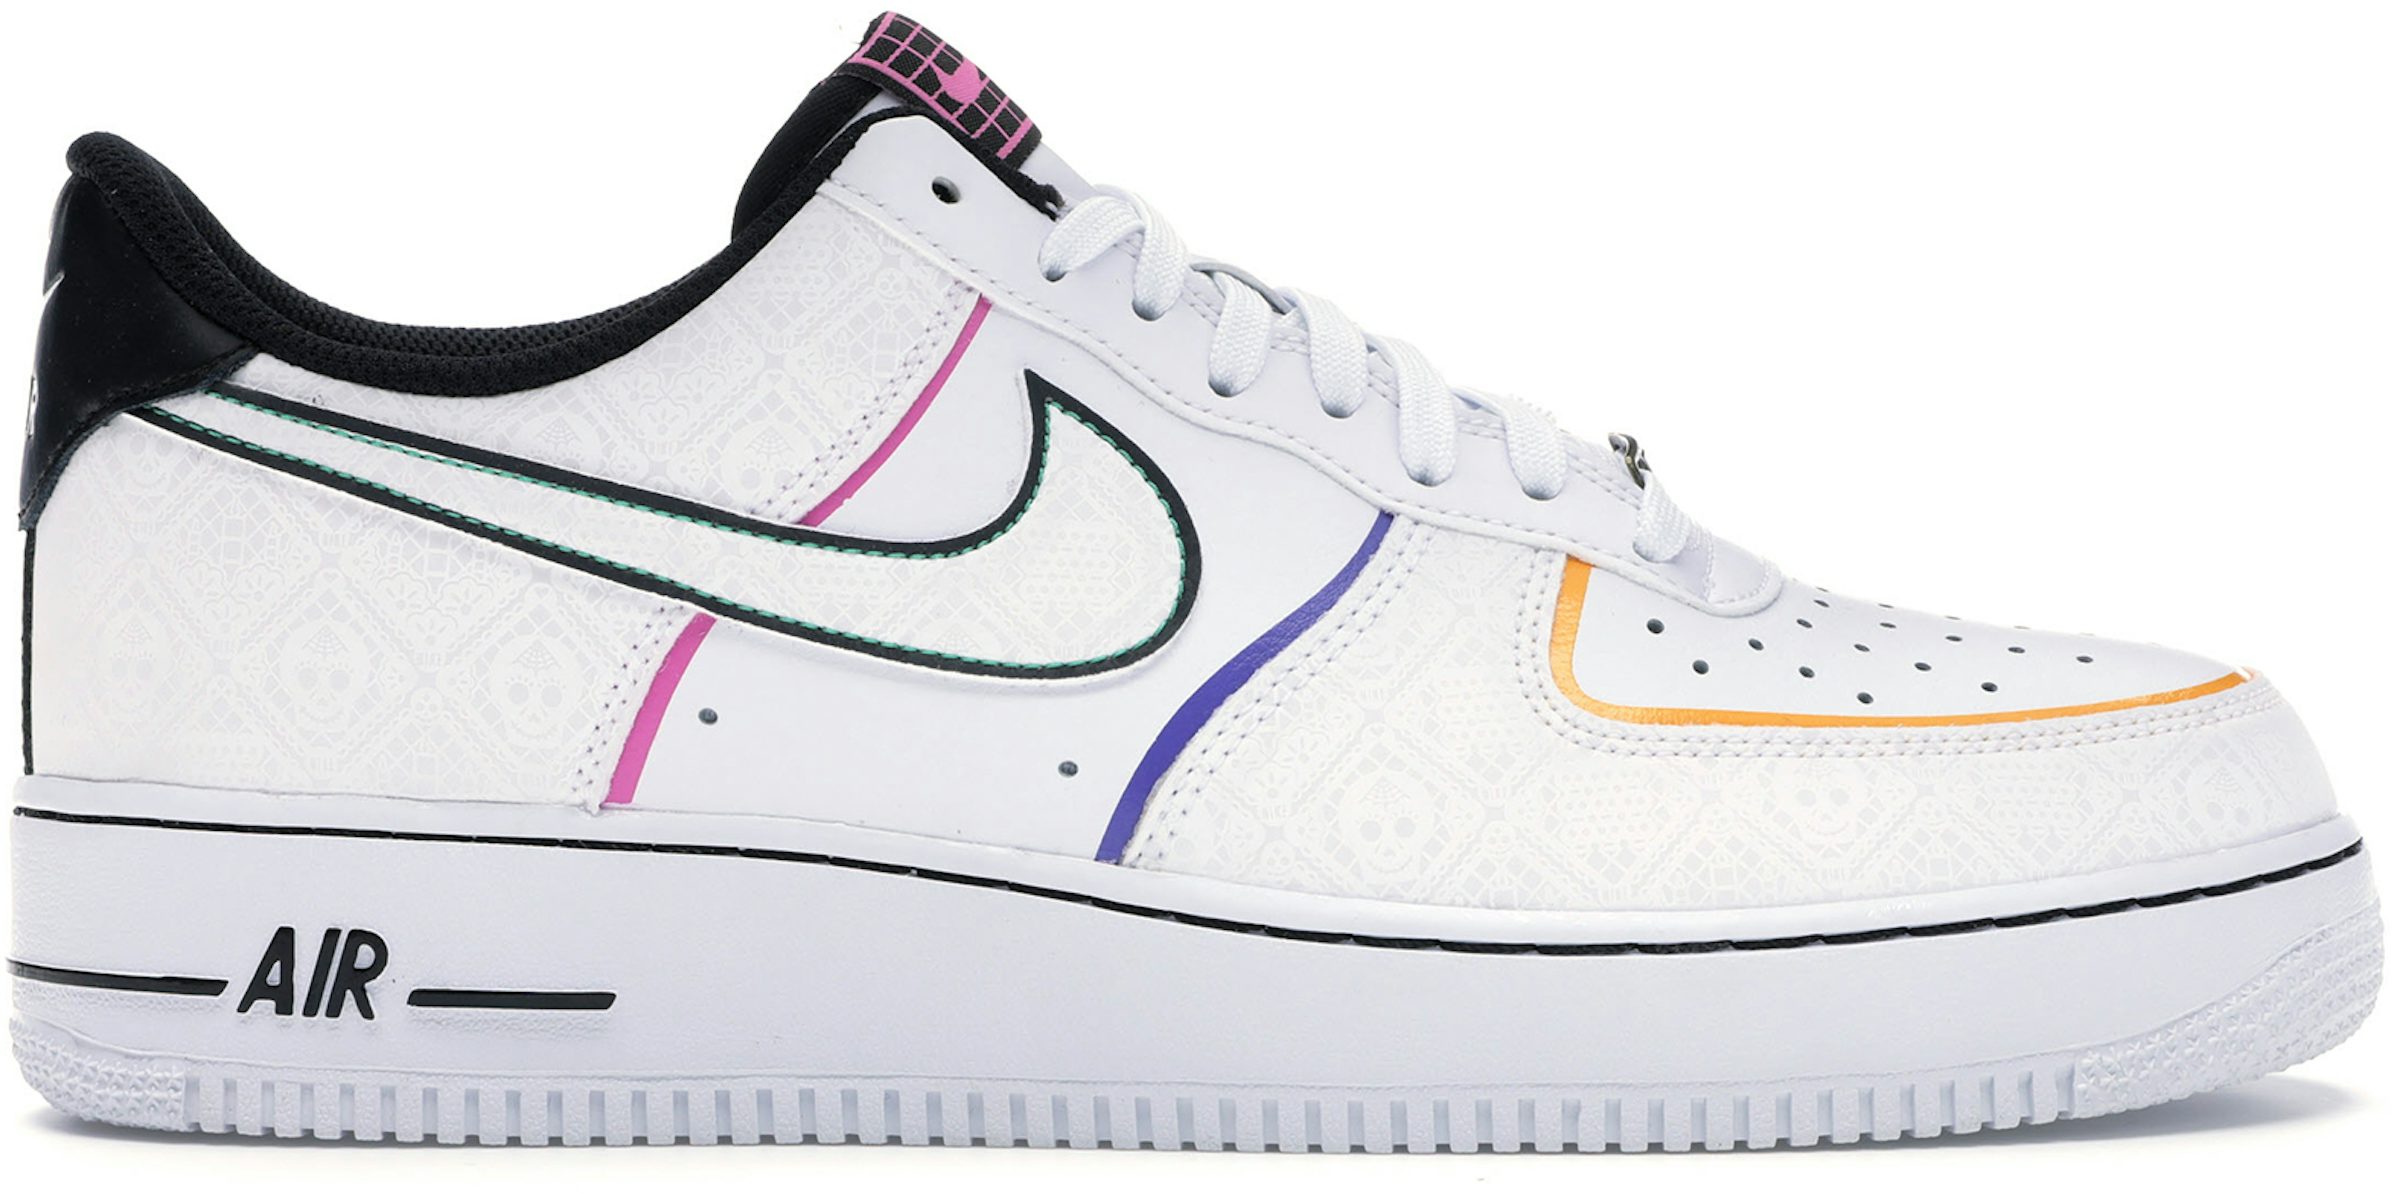 These Nike Air Force 1s Cost $275